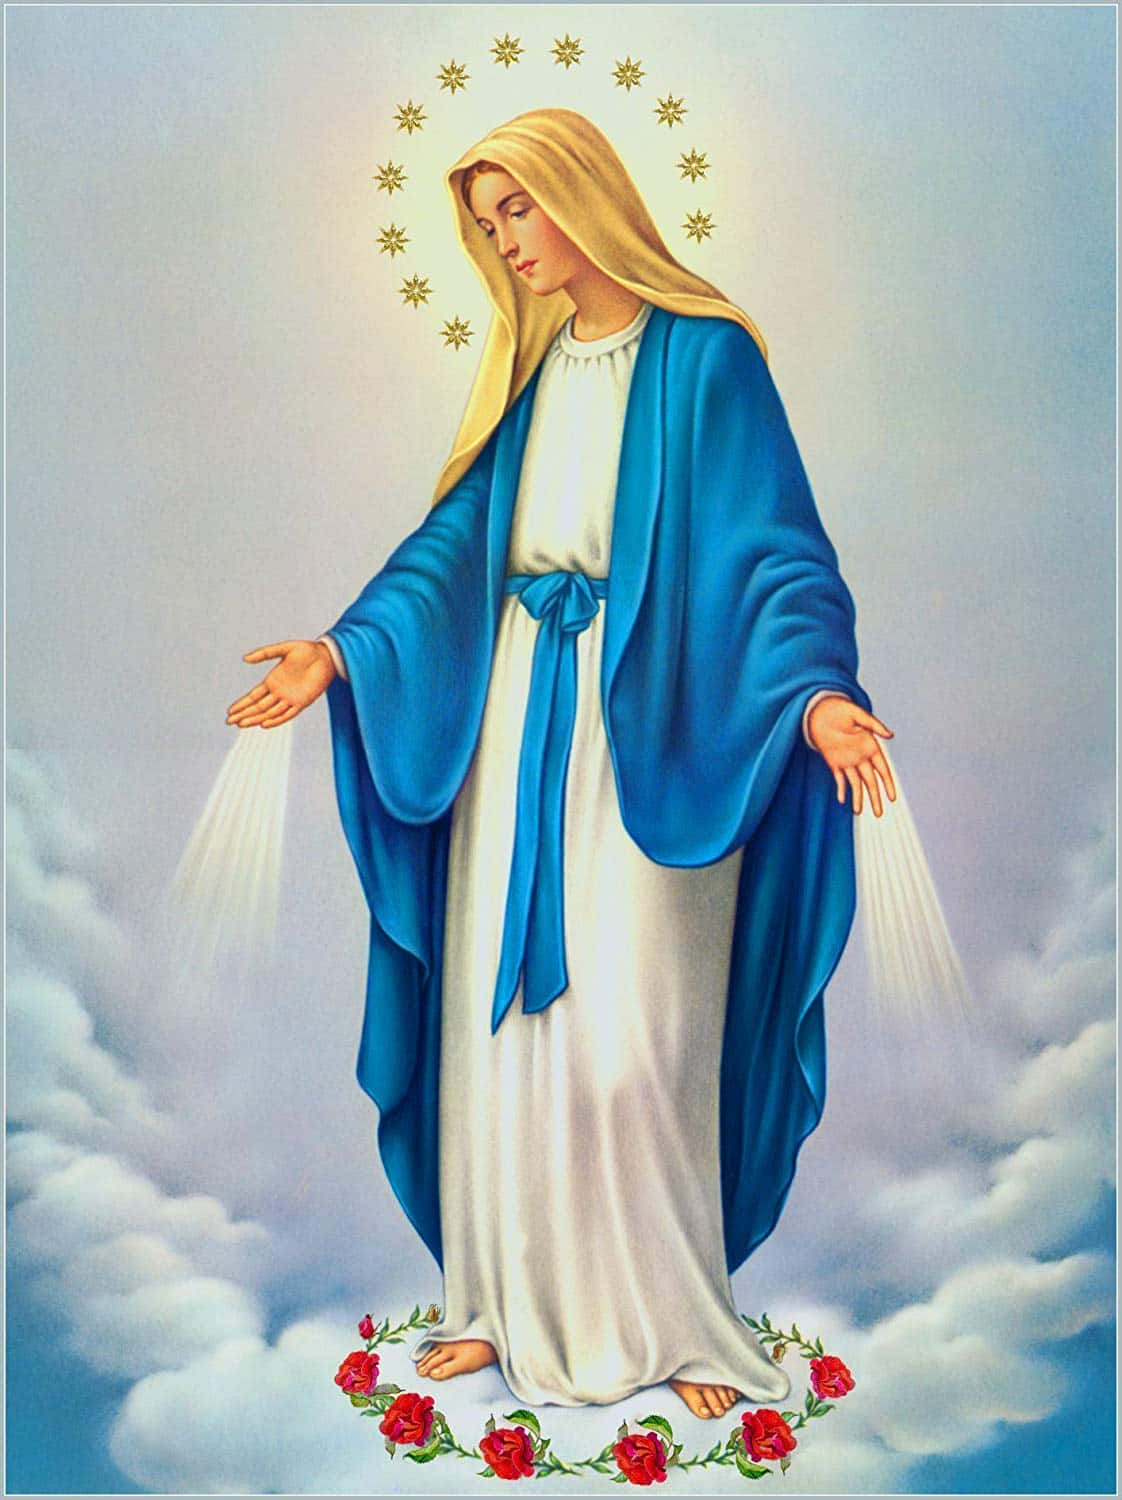 Mother Mary looking over us with grace and peace Wallpaper